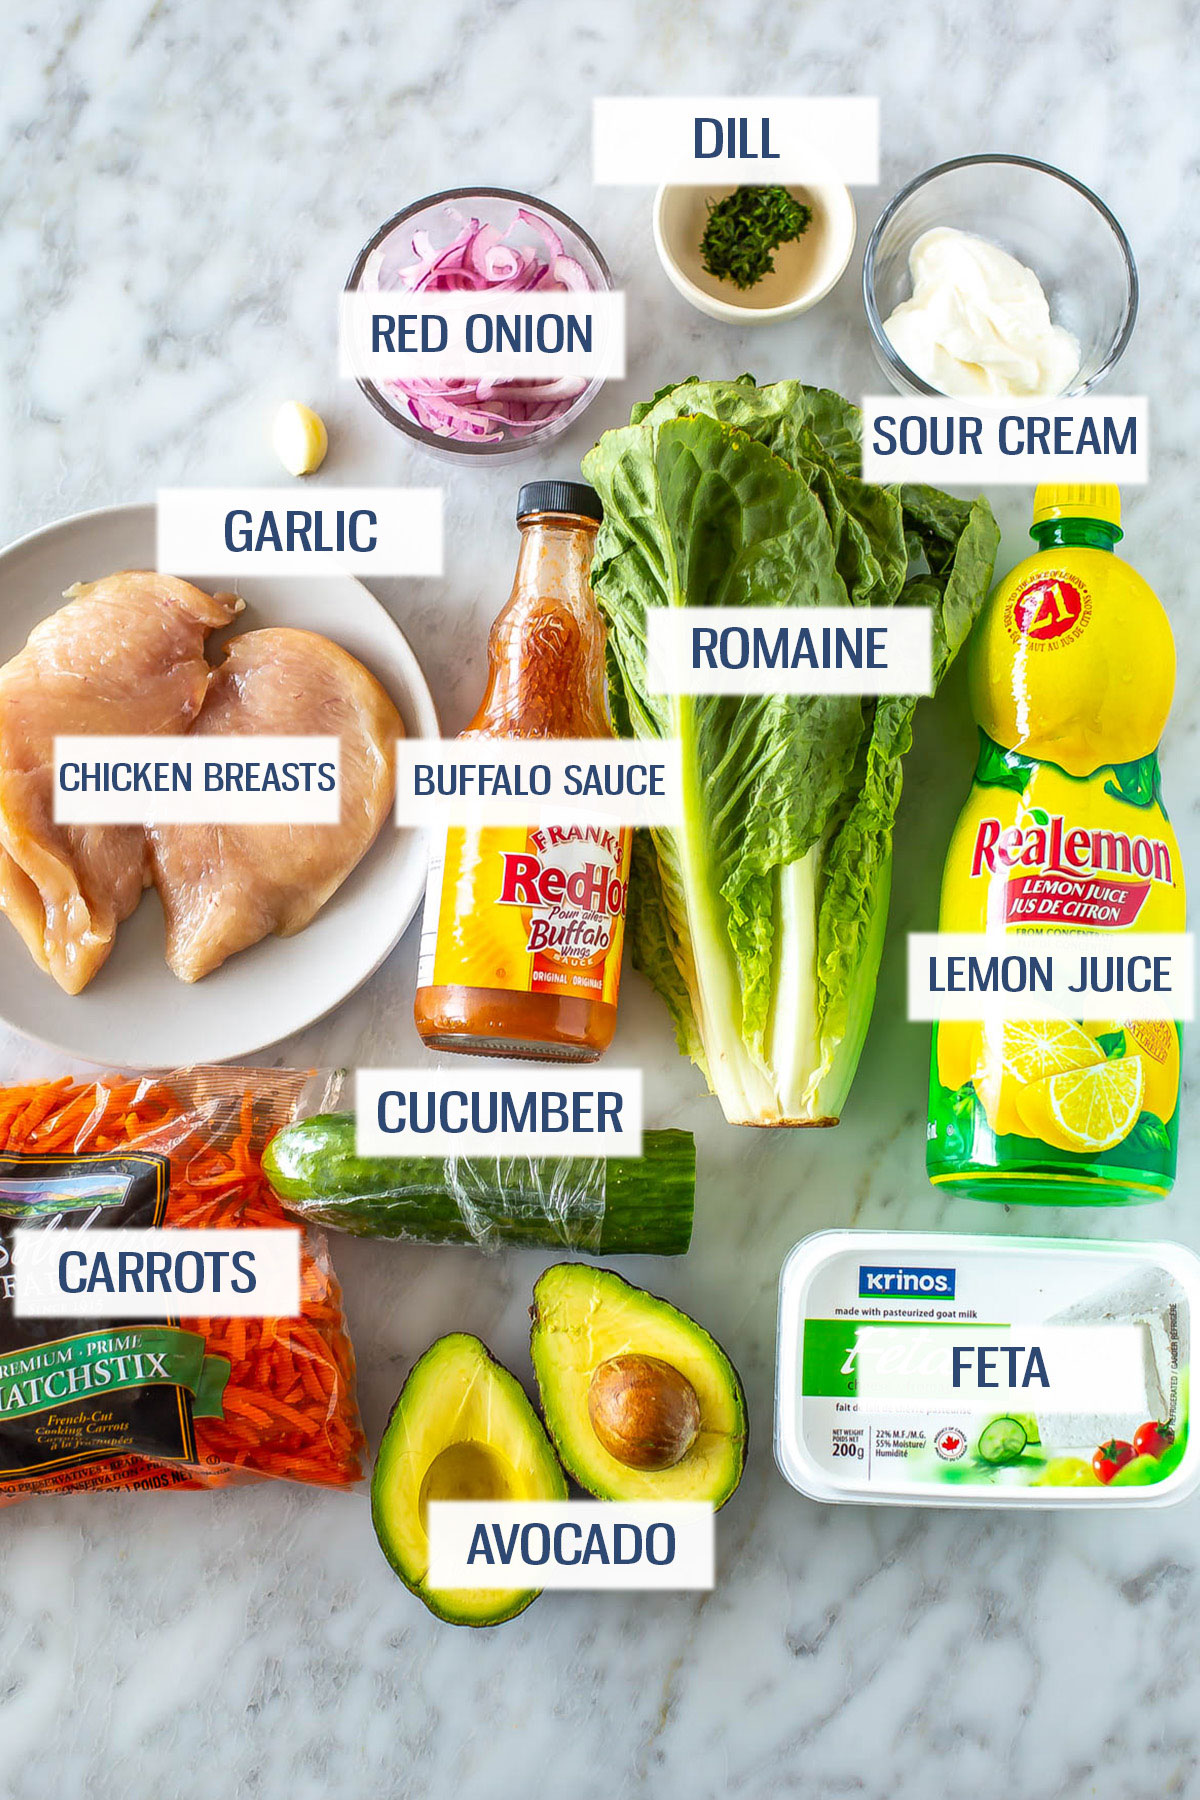 Ingredients for buffalo chicken salad: chicken breasts, garlic, red onion, dill, sour cream, carrots, buffalo sauce, romaine, lettuce juice, cucumber, avocado, and feta.